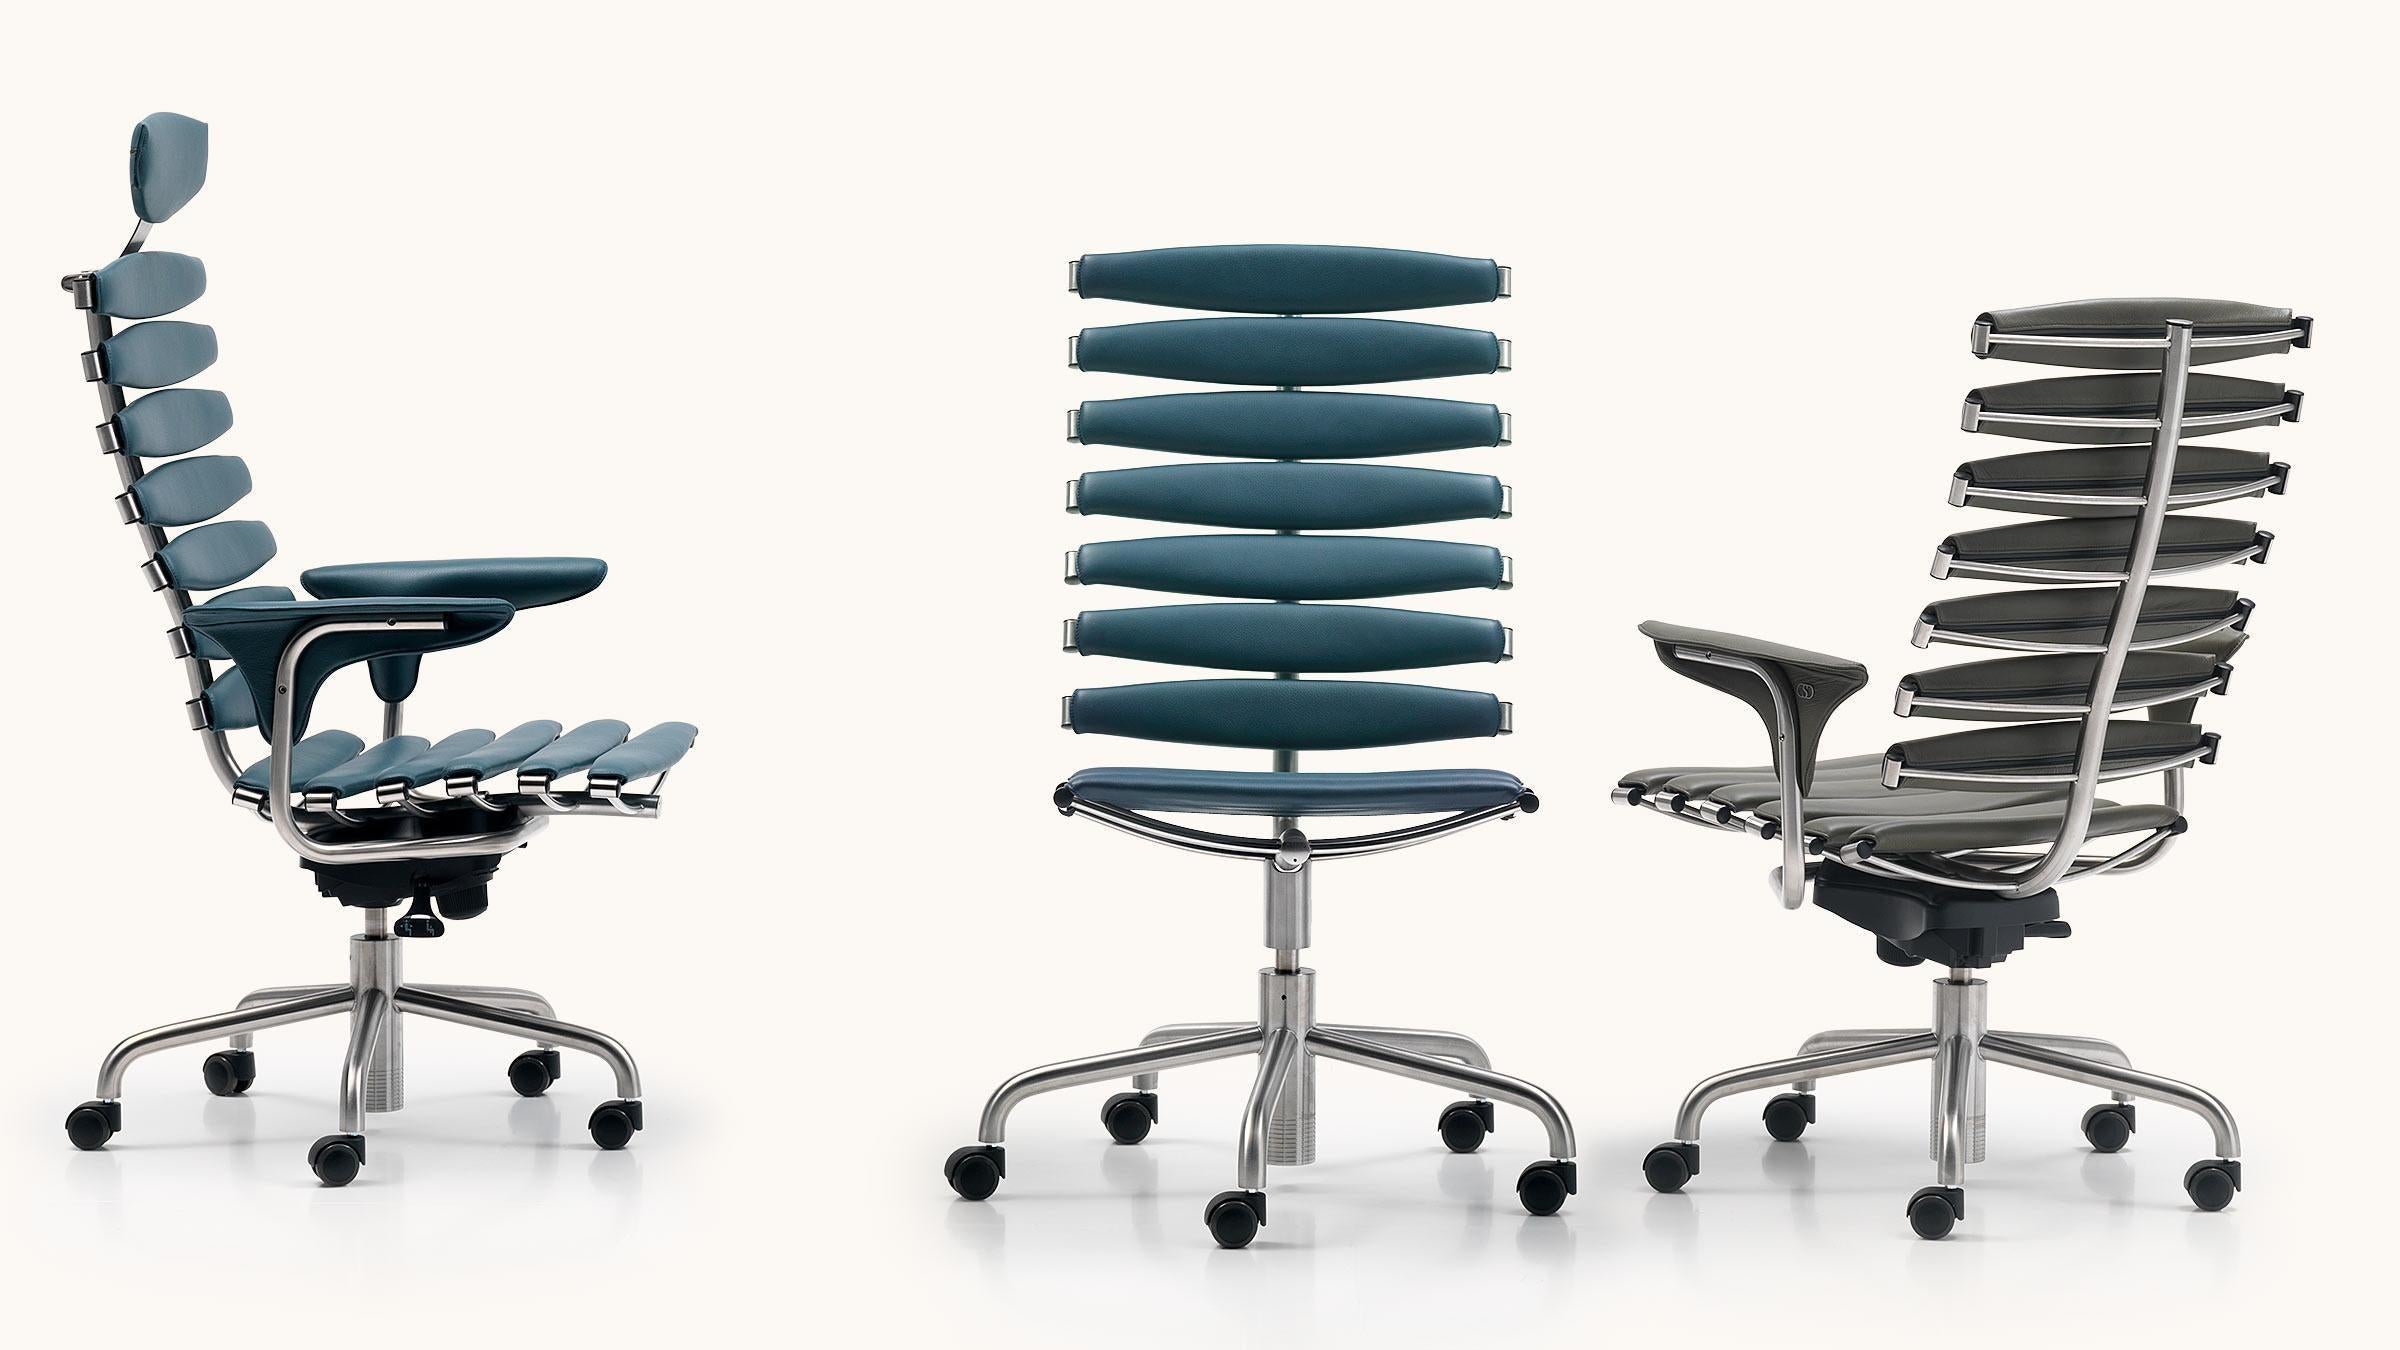 The slats on DS-2100 in finest leather adapt to individual body contours and provide - with its embracing feeling - the highest level of comfort. Available as a low-backed, visitor swivel chair, a high-backed executive chair, with headrest, tilt